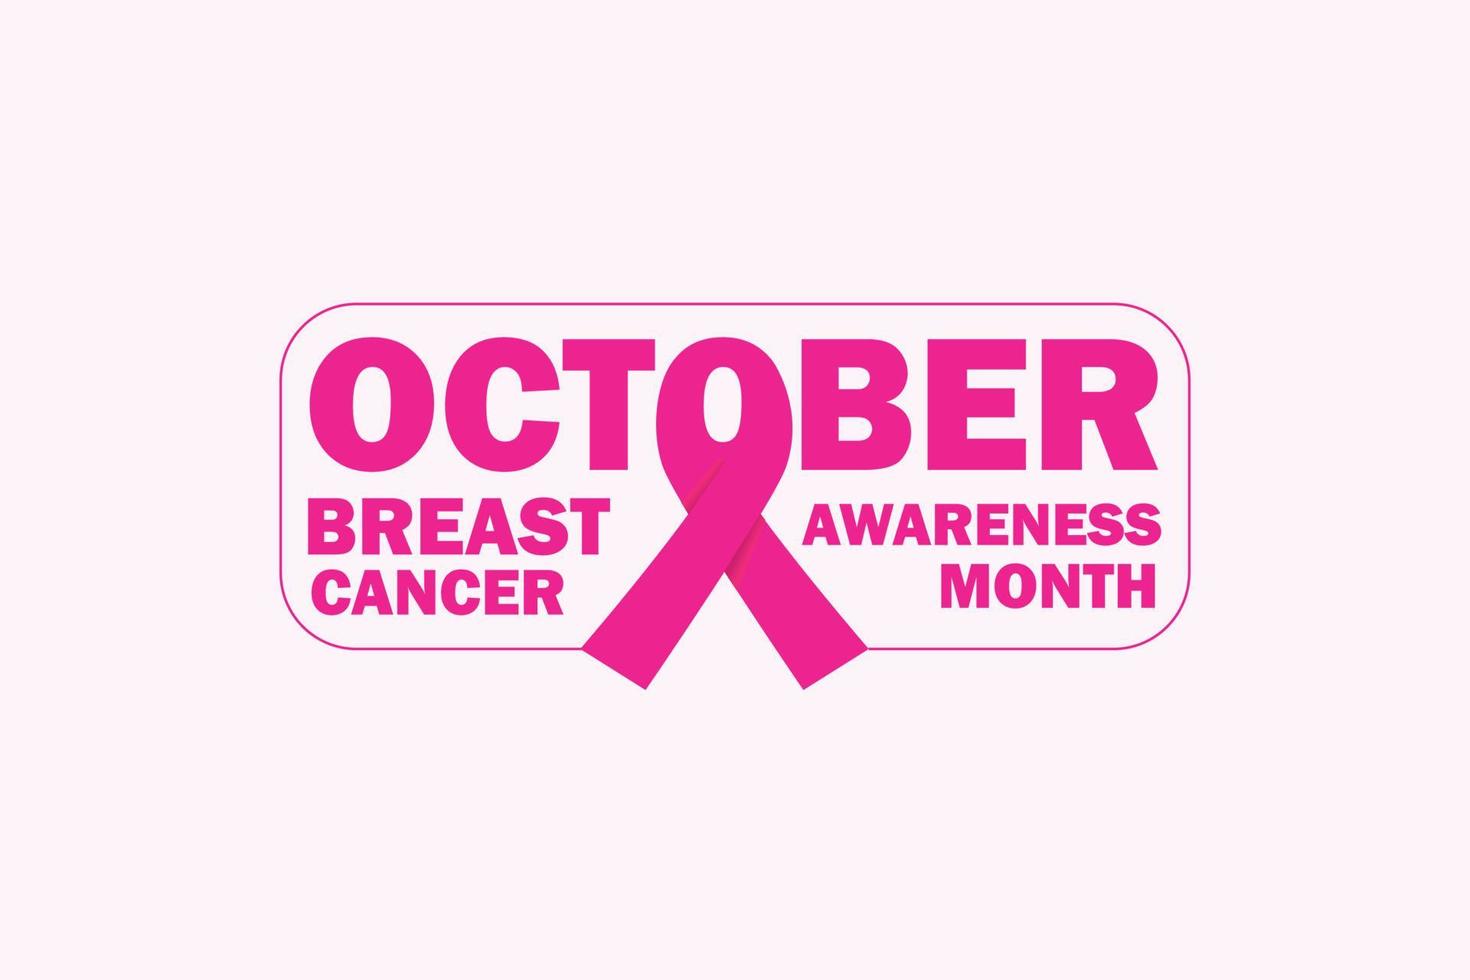 October Breast Cancer Awareness Month Banner With Ribbon and creative lettering background design vector